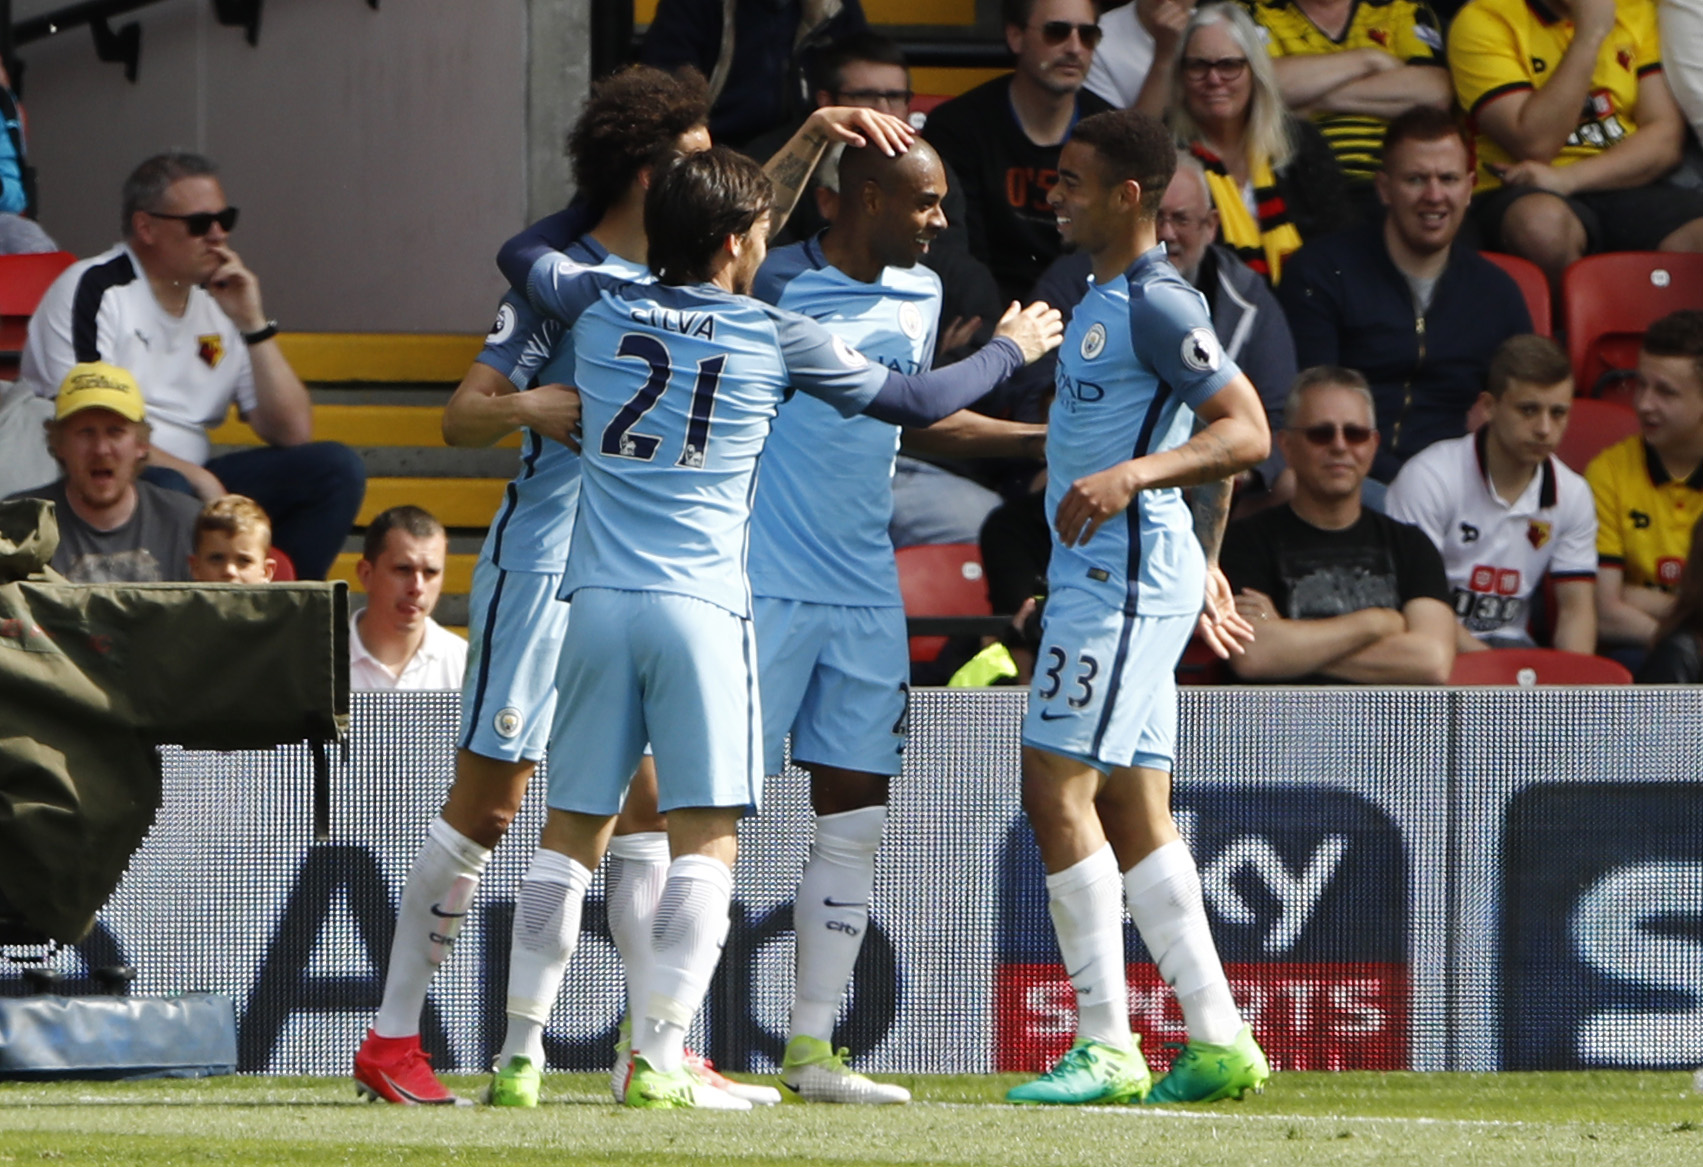 Football: Manchester City romp to win at Watford to ensure third place